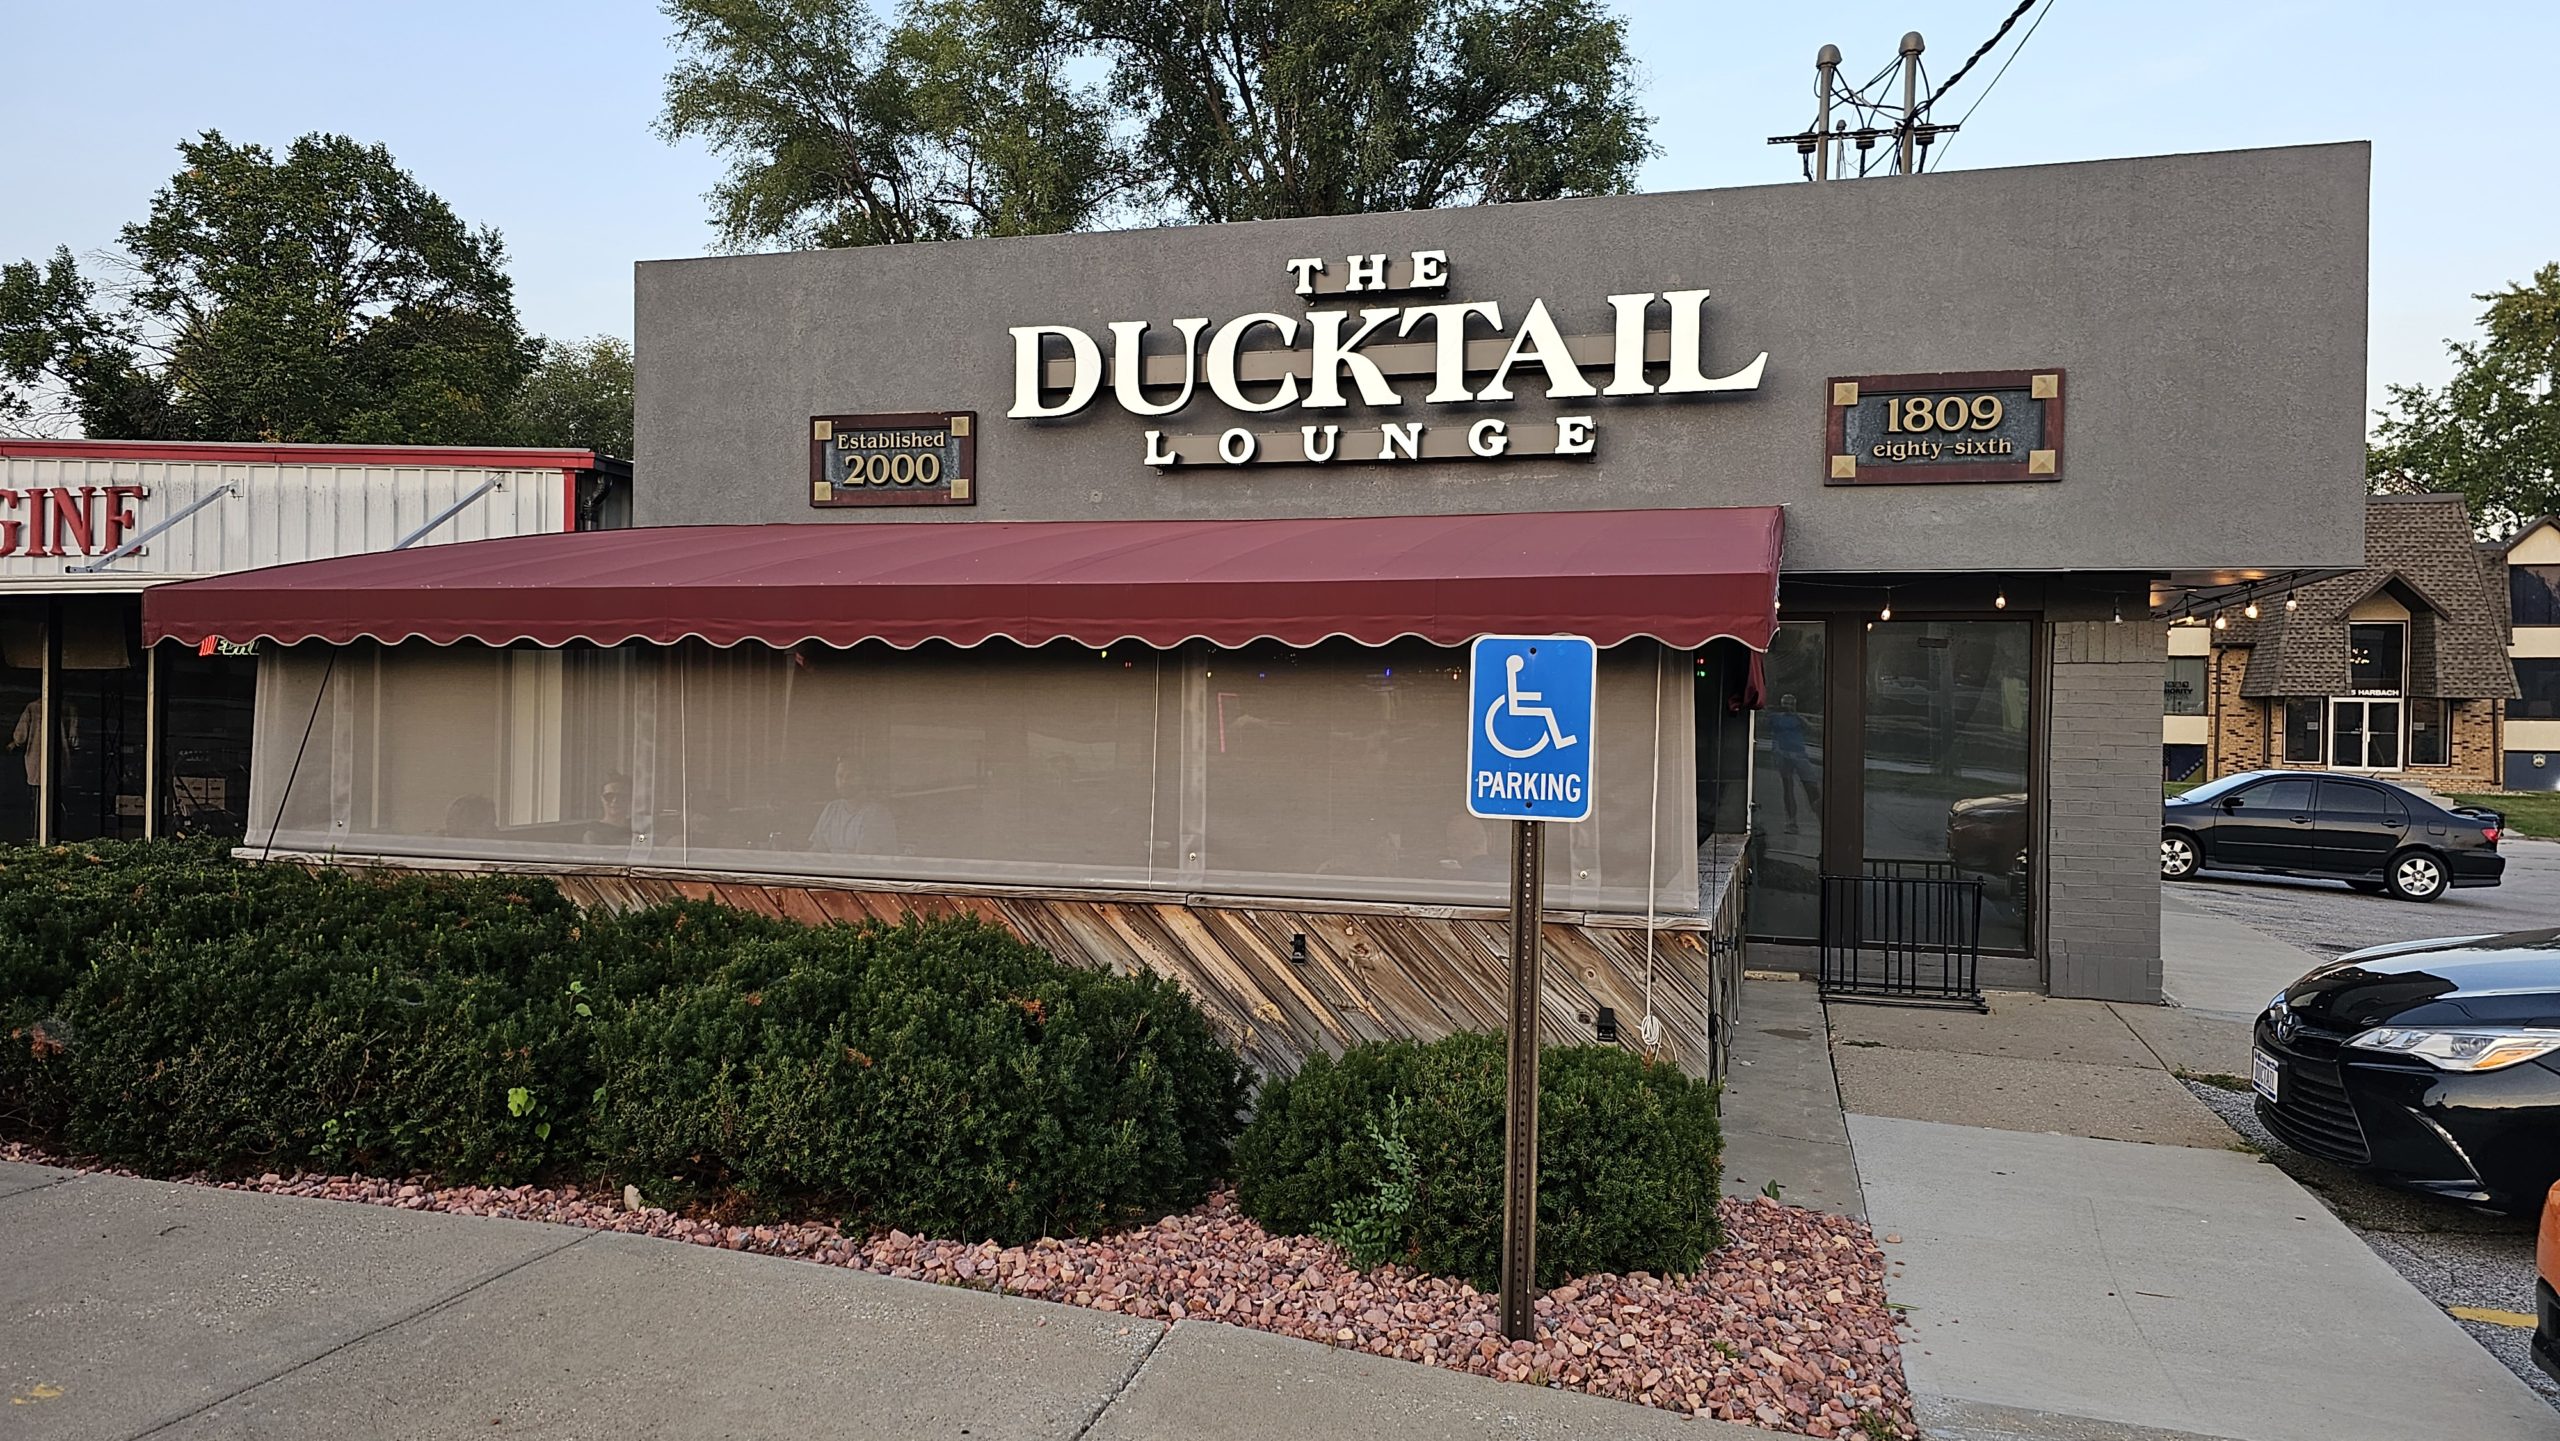 The Ducktail Lounge (Clive)